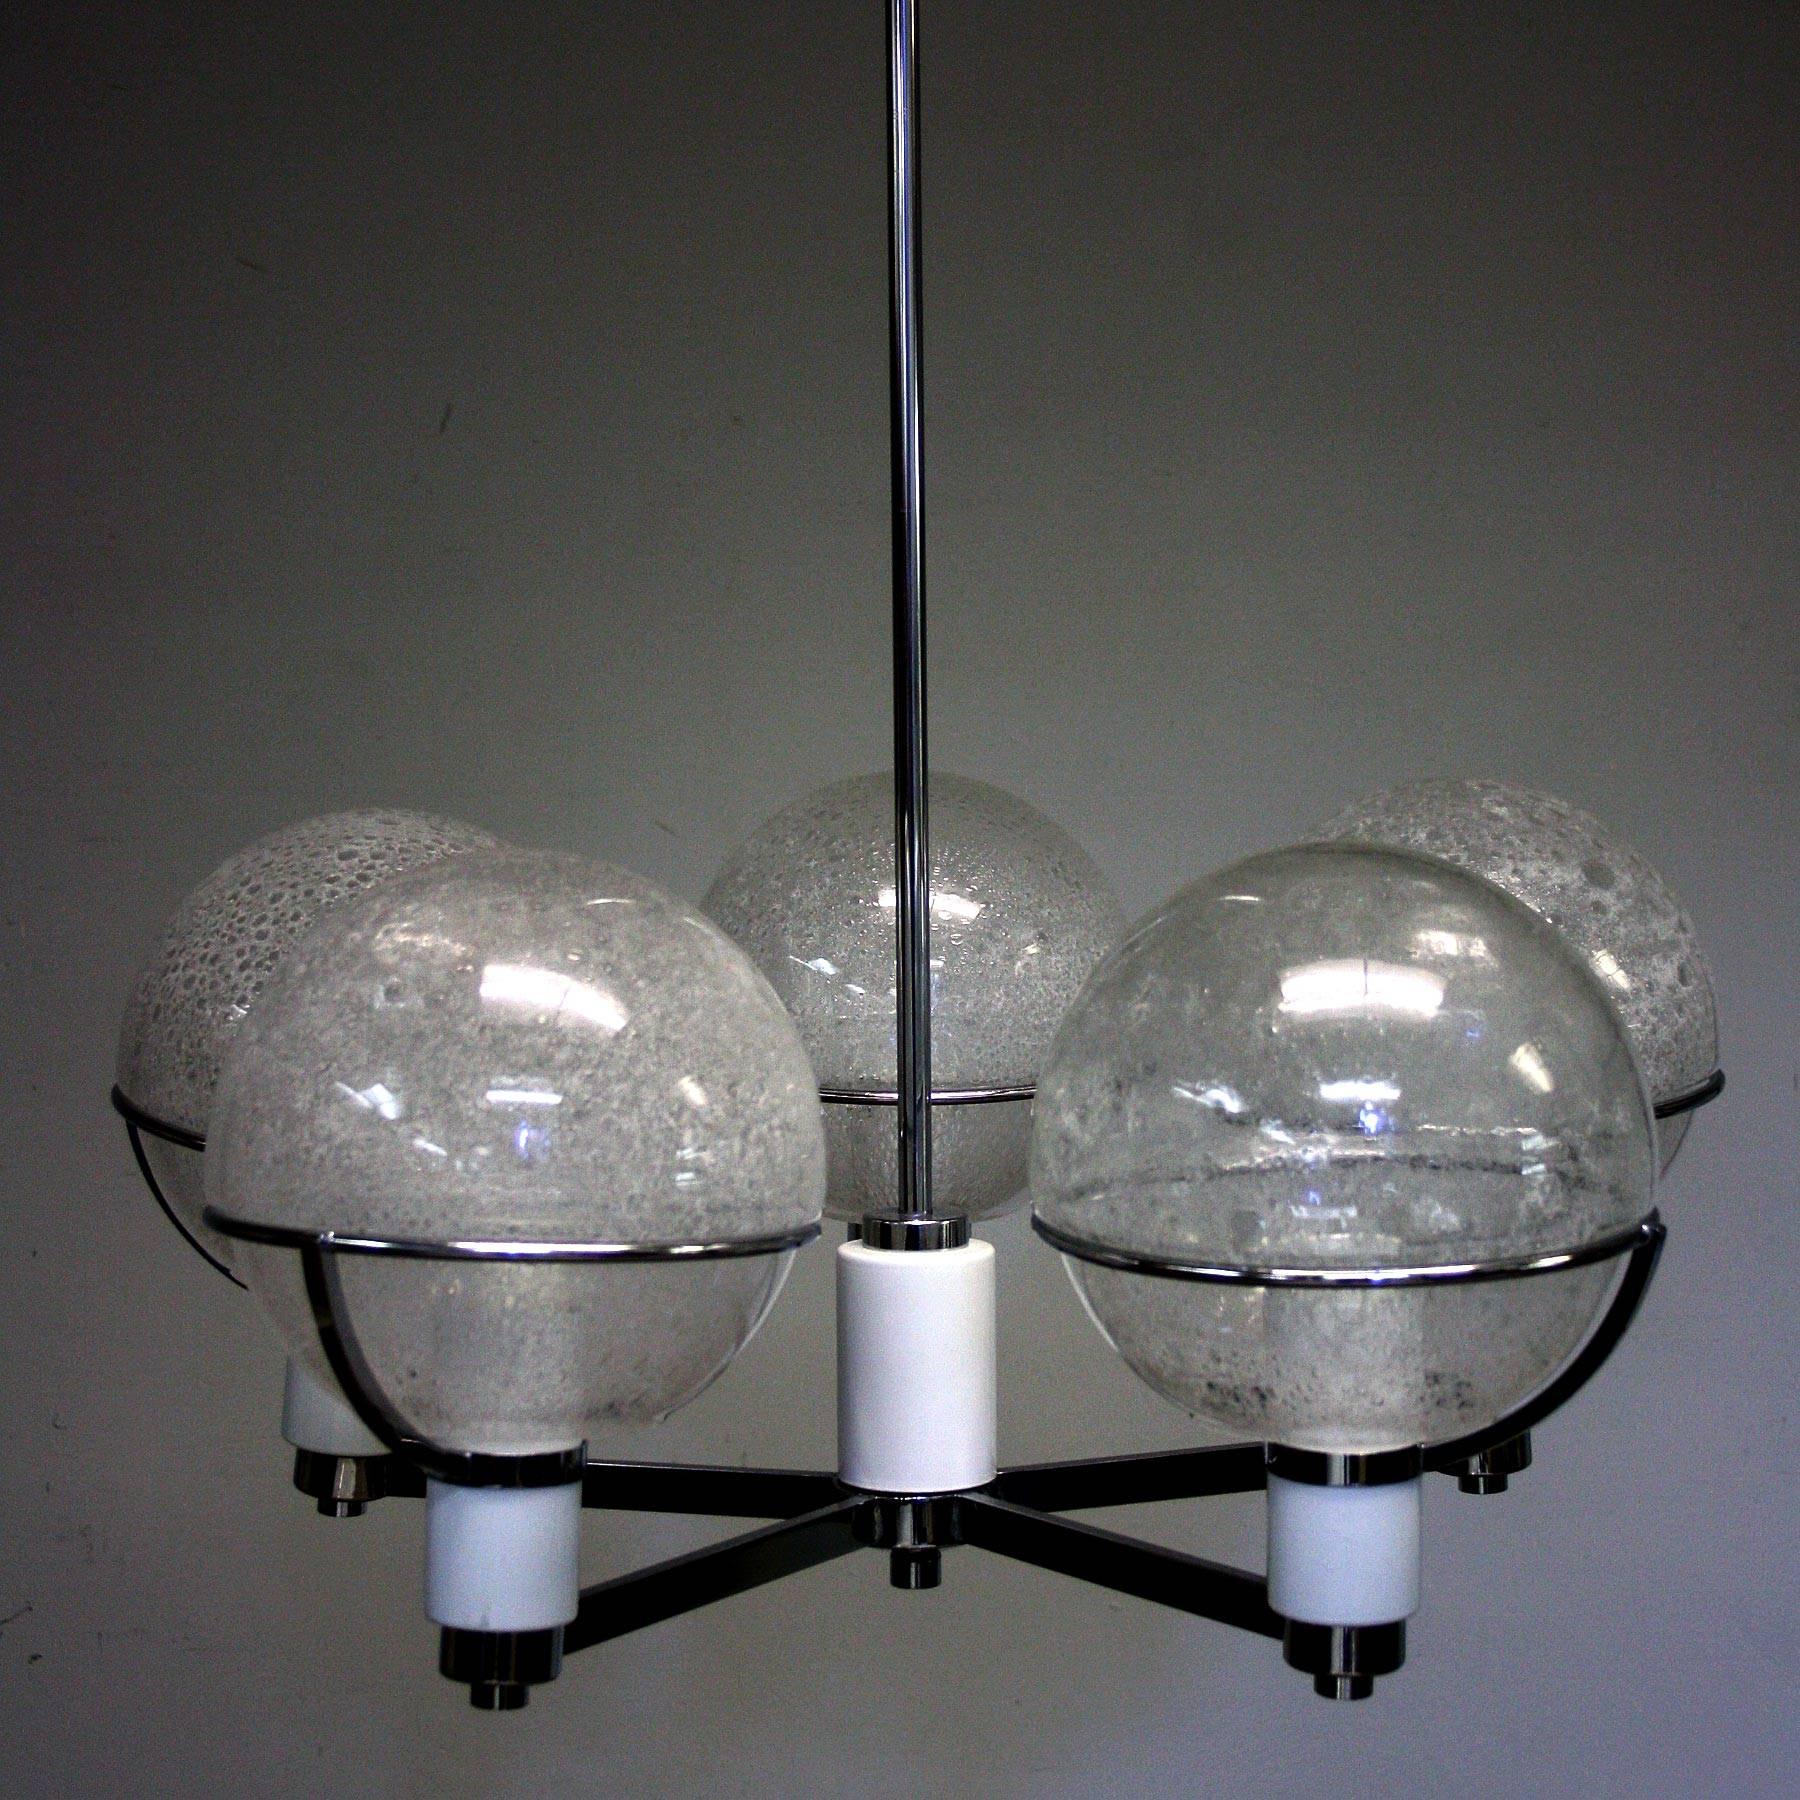 Vintage Mid-Century chandelier by Sergio Mazza, circa 1960s.

White and chrome frame holding five Murano glass balls.